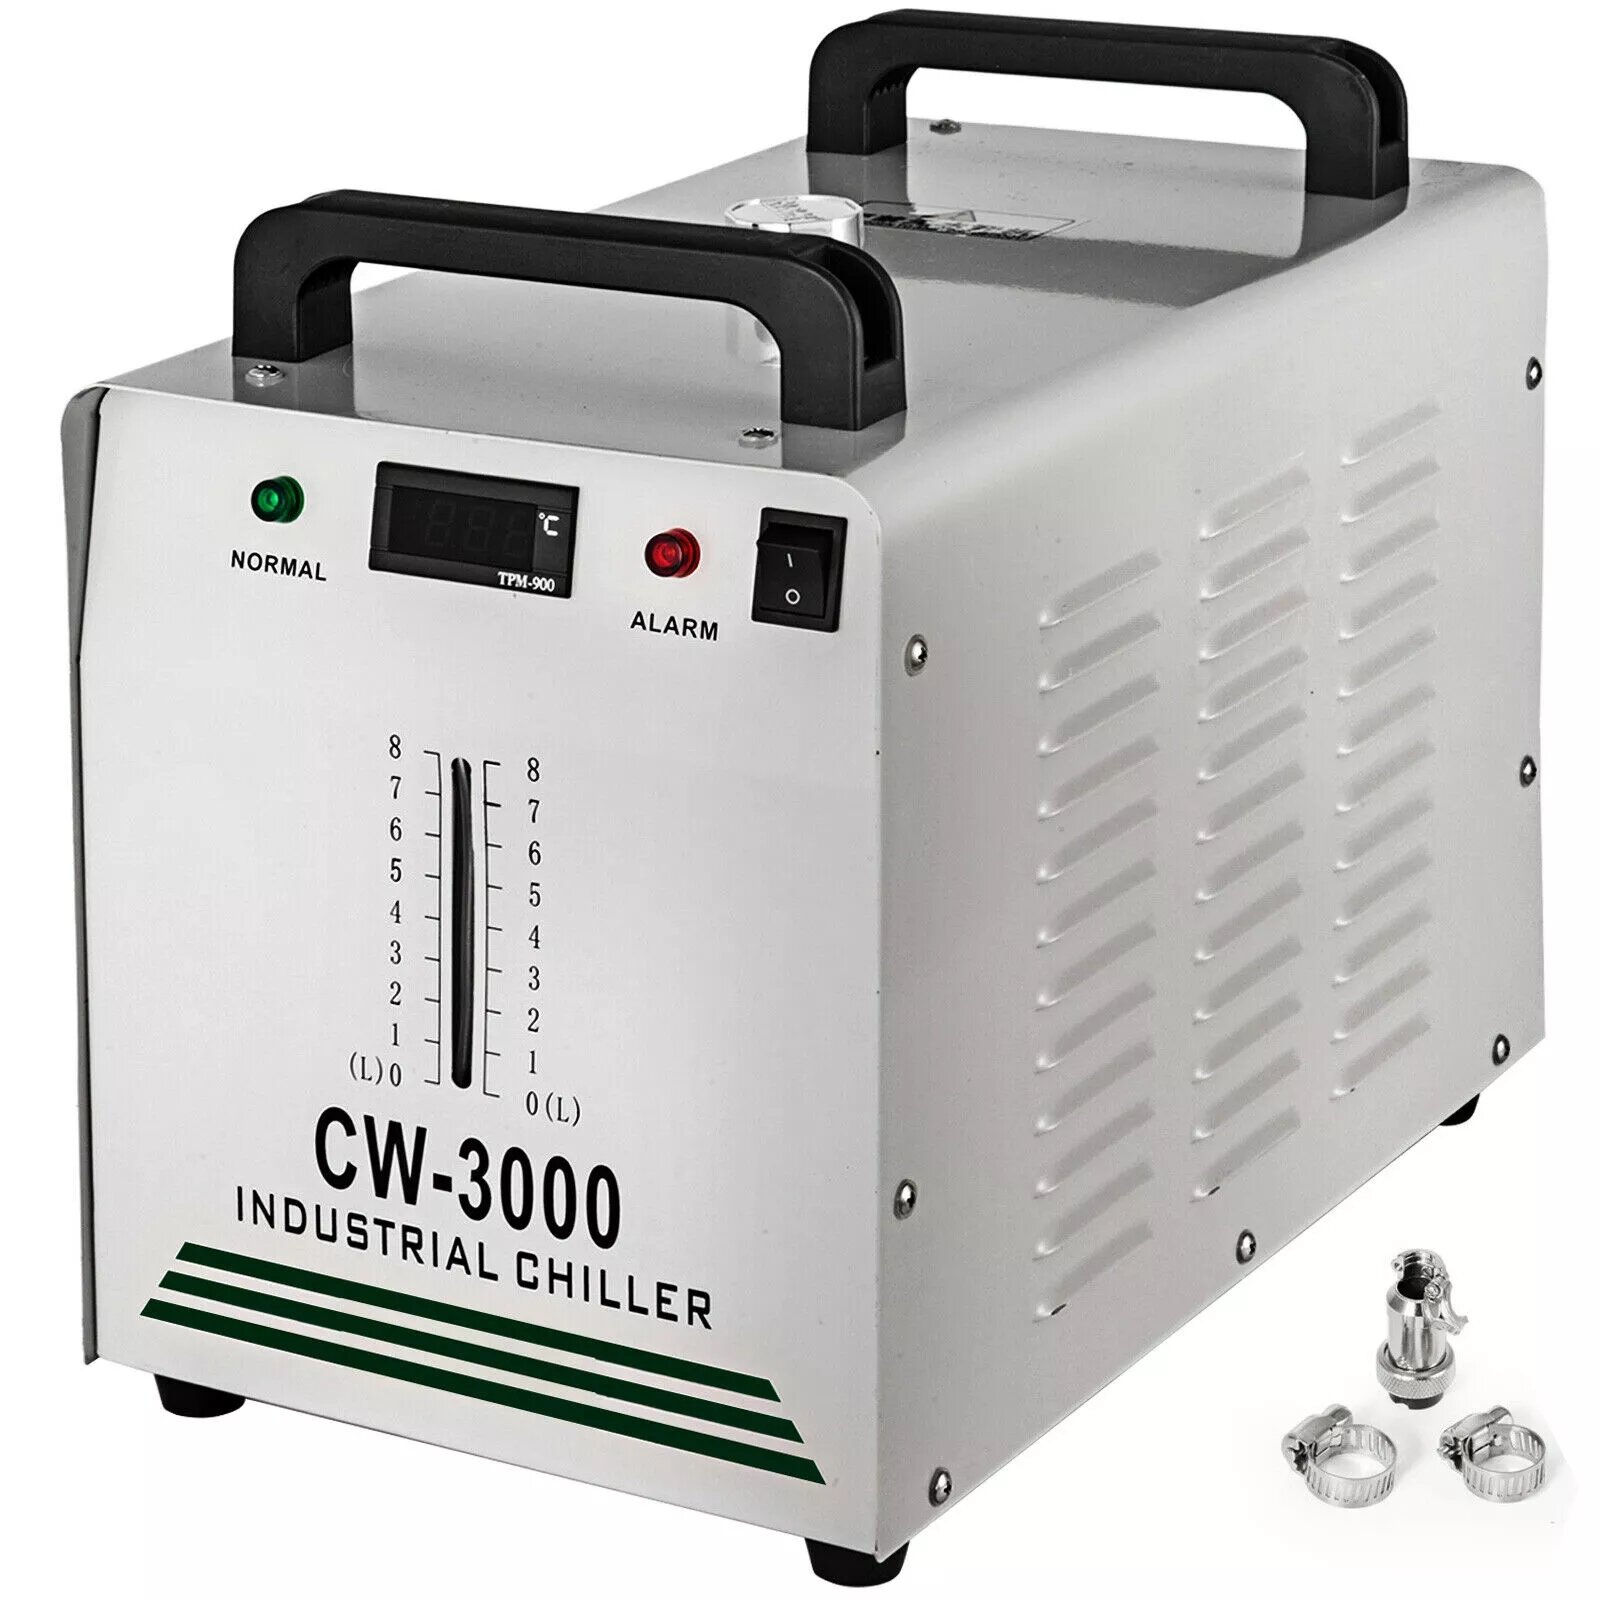 

CW-3000 Industrial Water Chiller Cooler for Cooling Co2 Glass Laser Tube Under 60w/80w of the Laser Engraving Tool